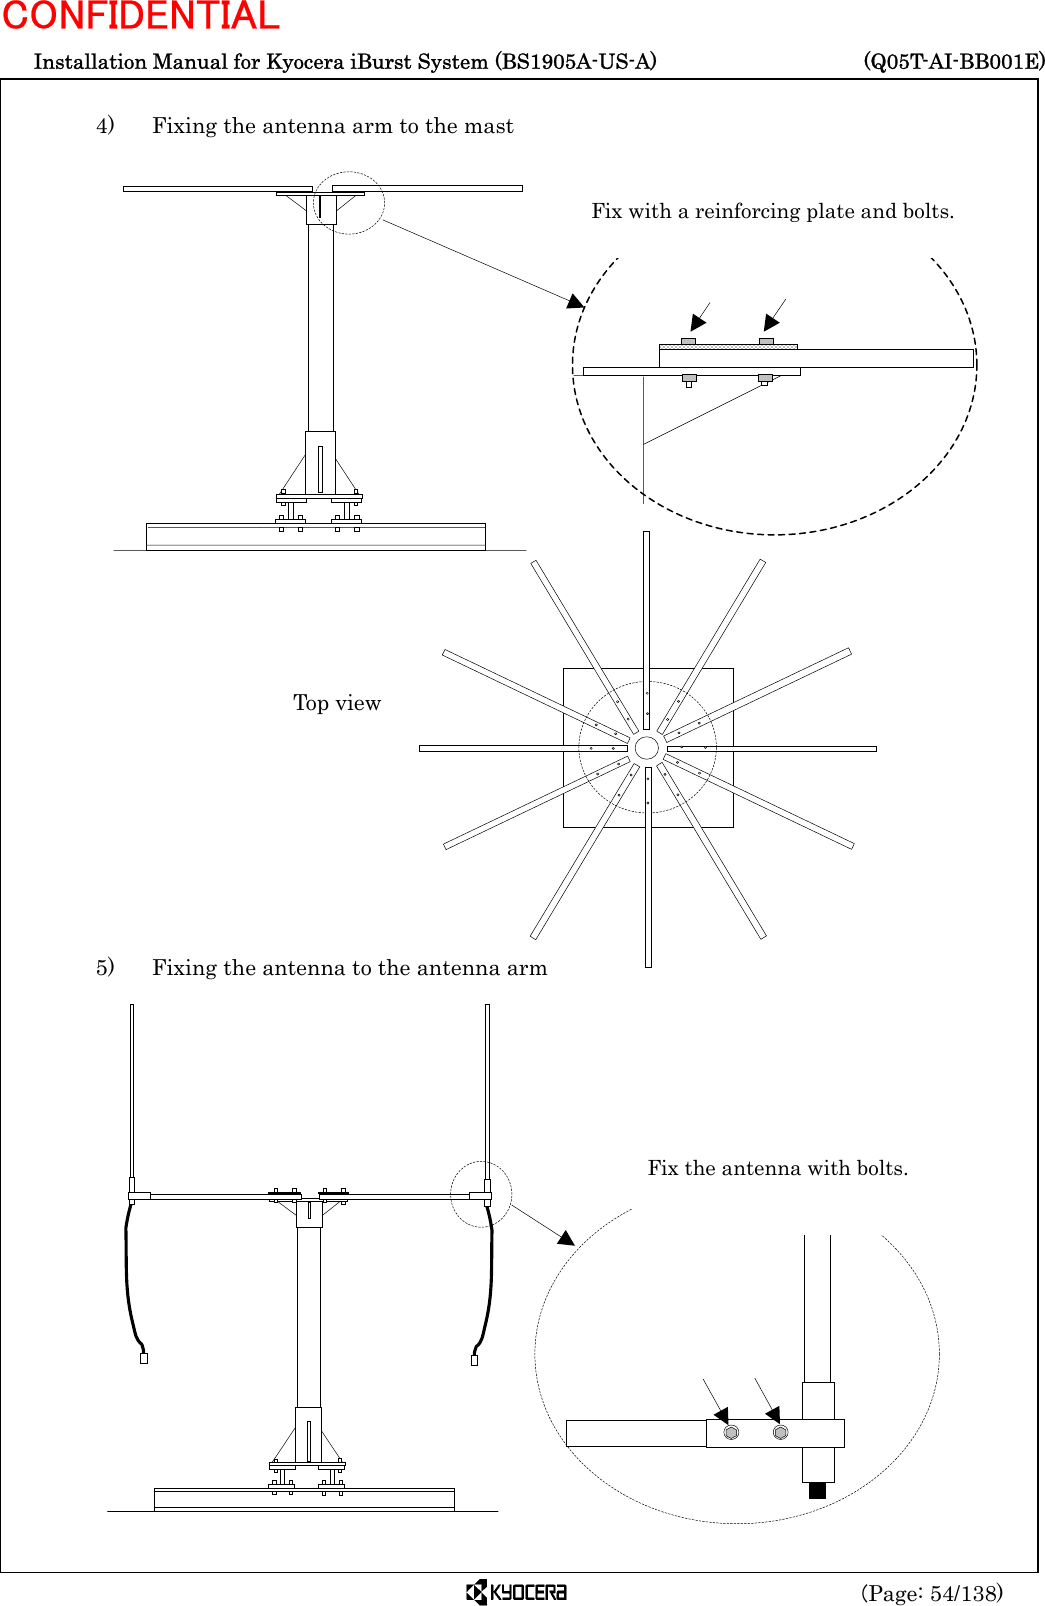  Installation Manual for Kyocera iBurst System (BS1905A-US-A)     (Q05T-AI-BB001E) (Page: 54/138) CONFIDENTIAL  4)    Fixing the antenna arm to the mast                                5)    Fixing the antenna to the antenna arm                     Fix with a reinforcing plate and bolts. Top view Fix the antenna with bolts. 